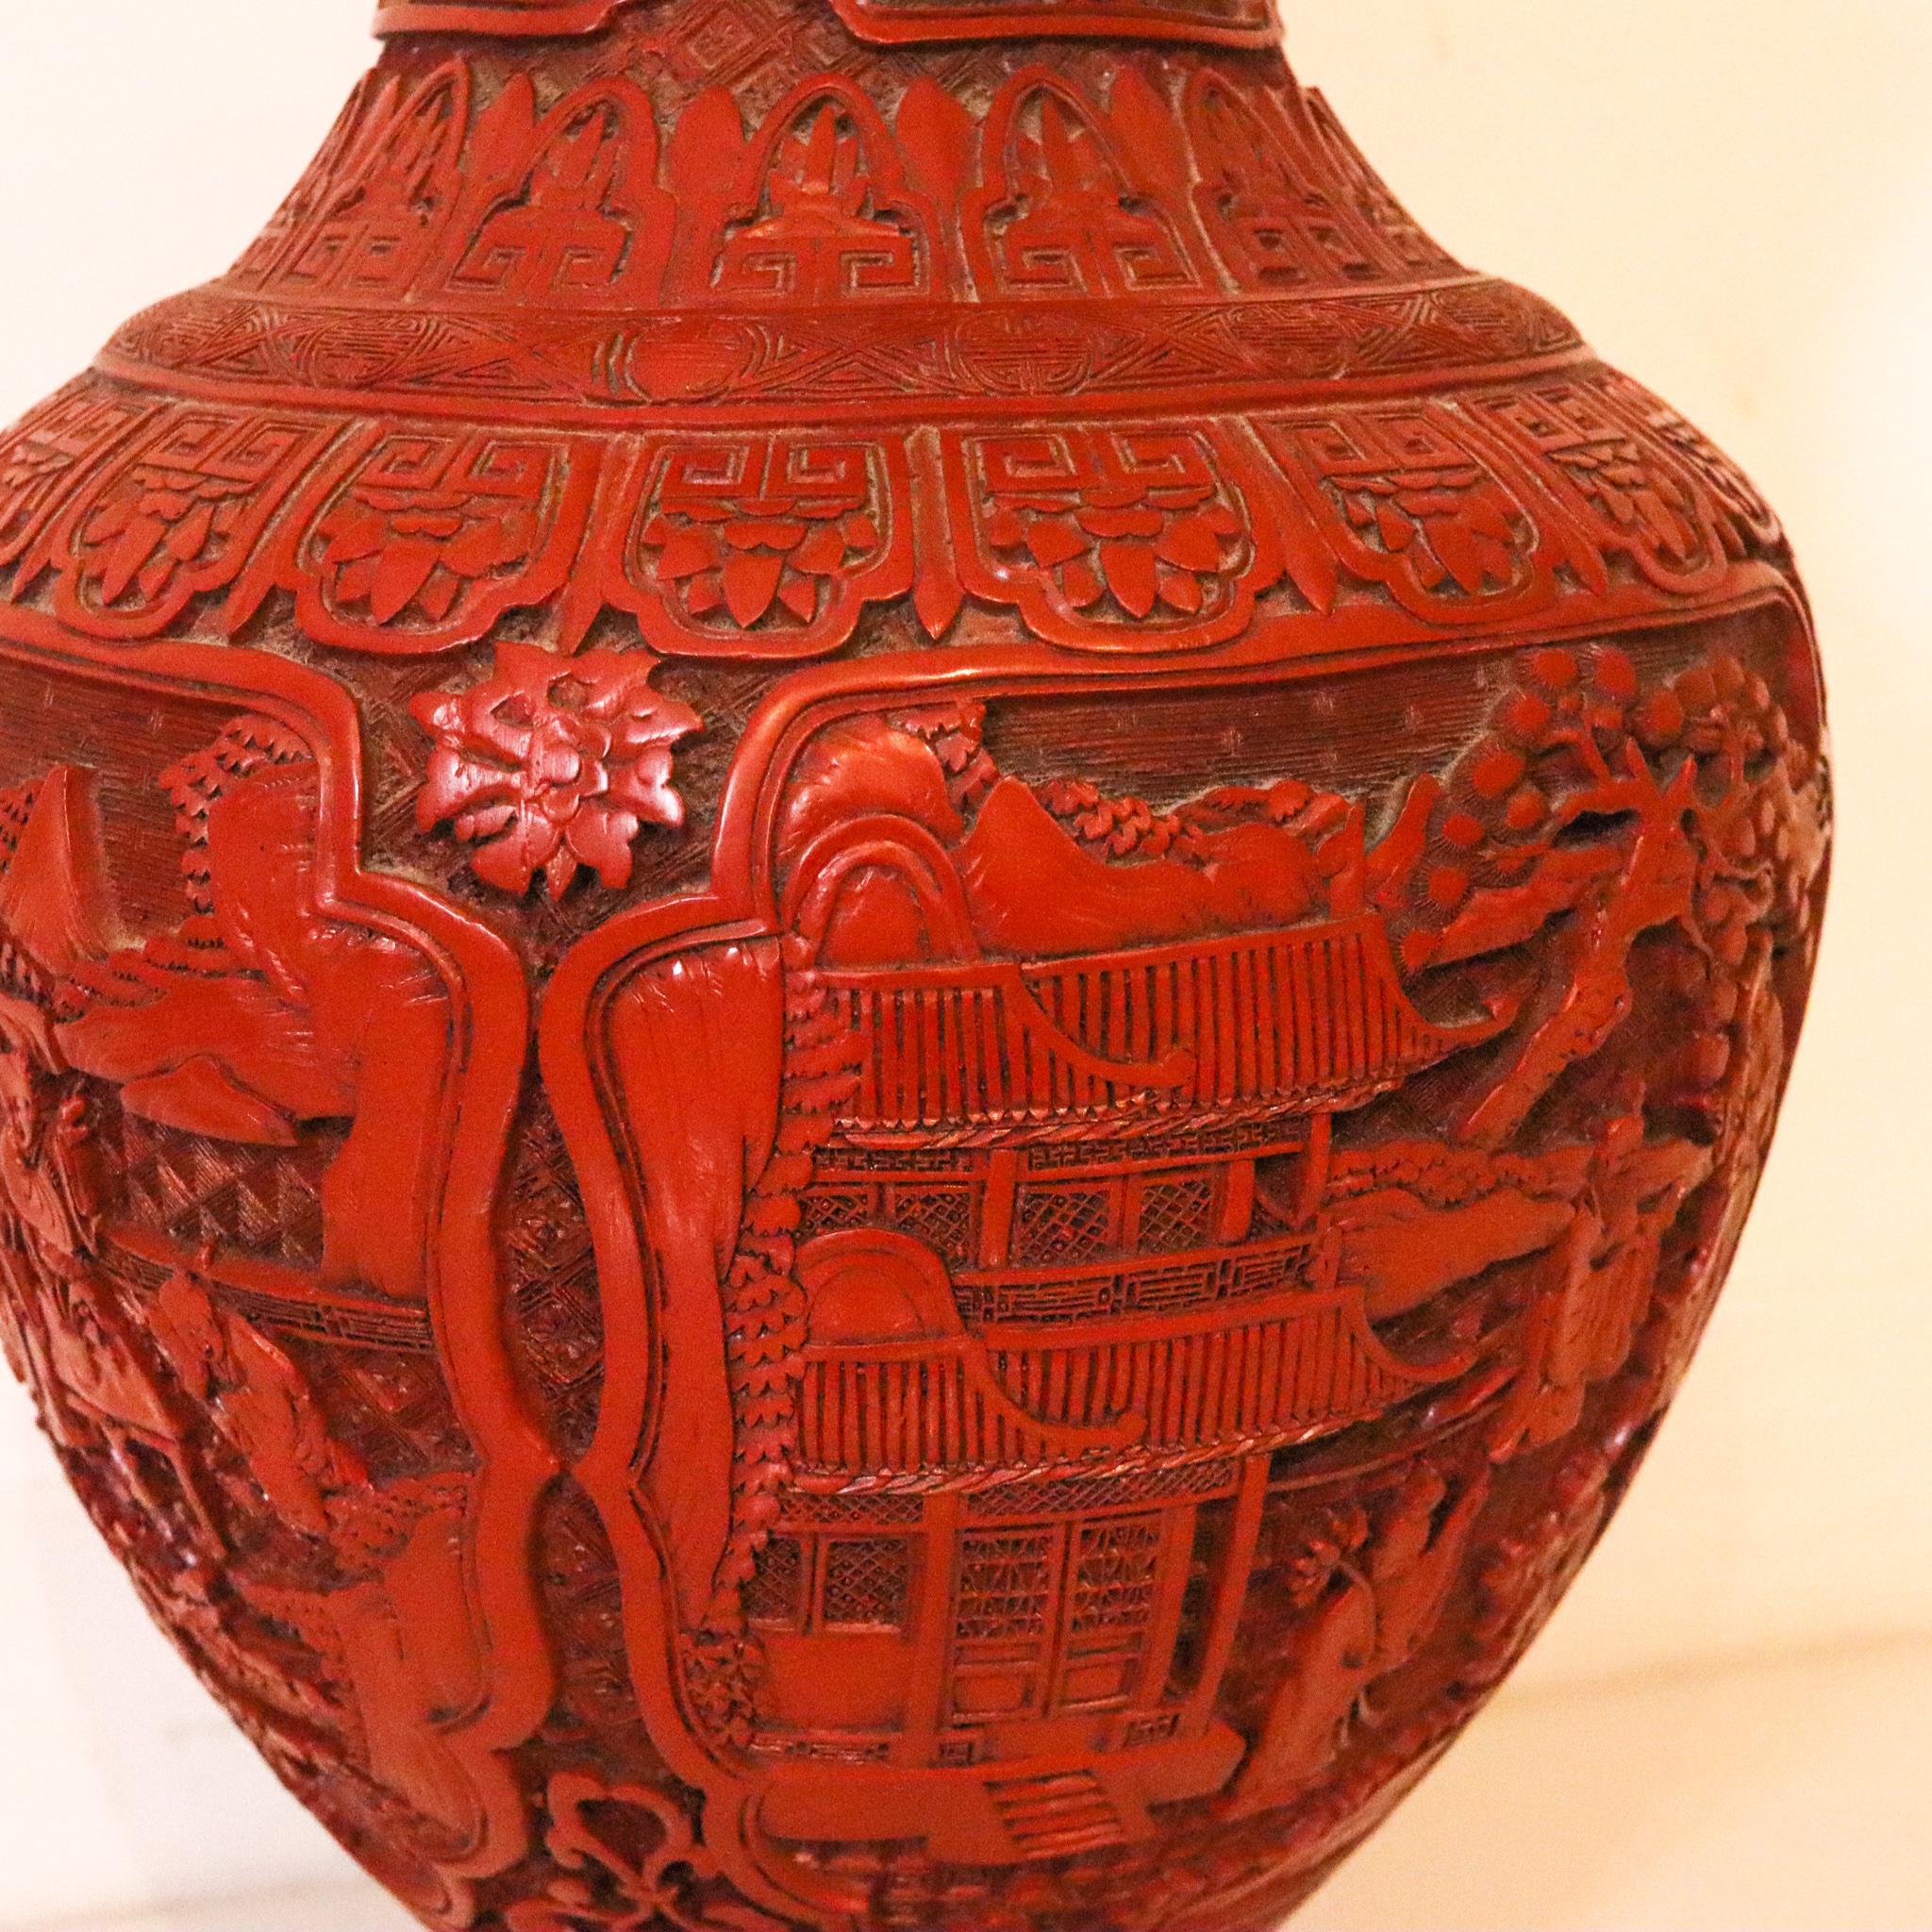 China Export Victorian 1900 Large Bombe Baluster Carved Vase in Red Cinnabar 2